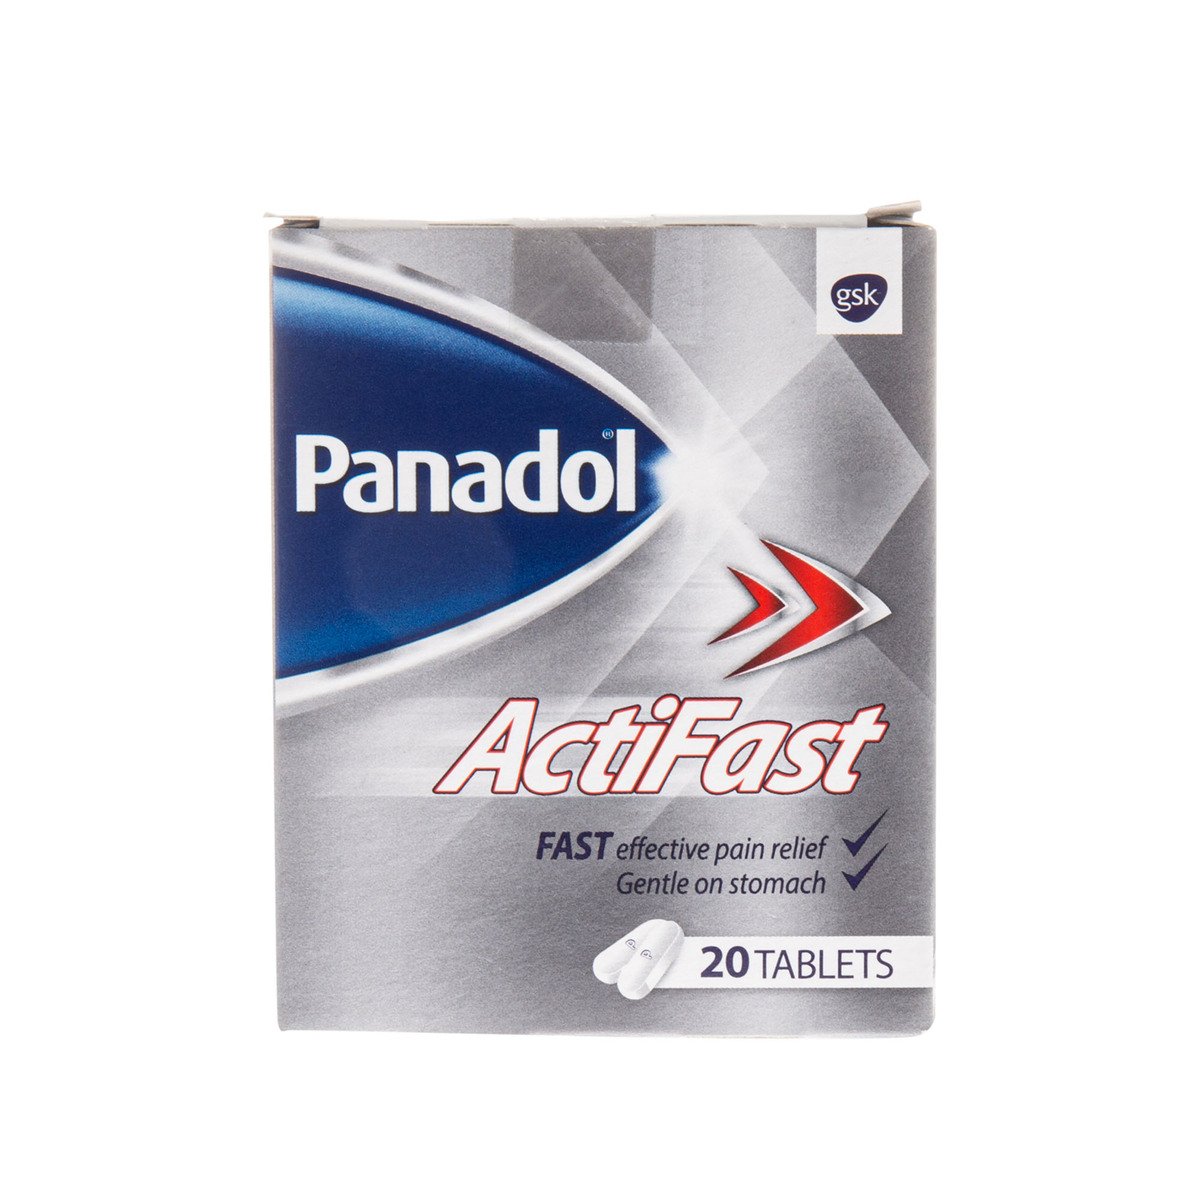 Panadol Actifast Tablets for Fast Pain Relief From Headaches 20pcs